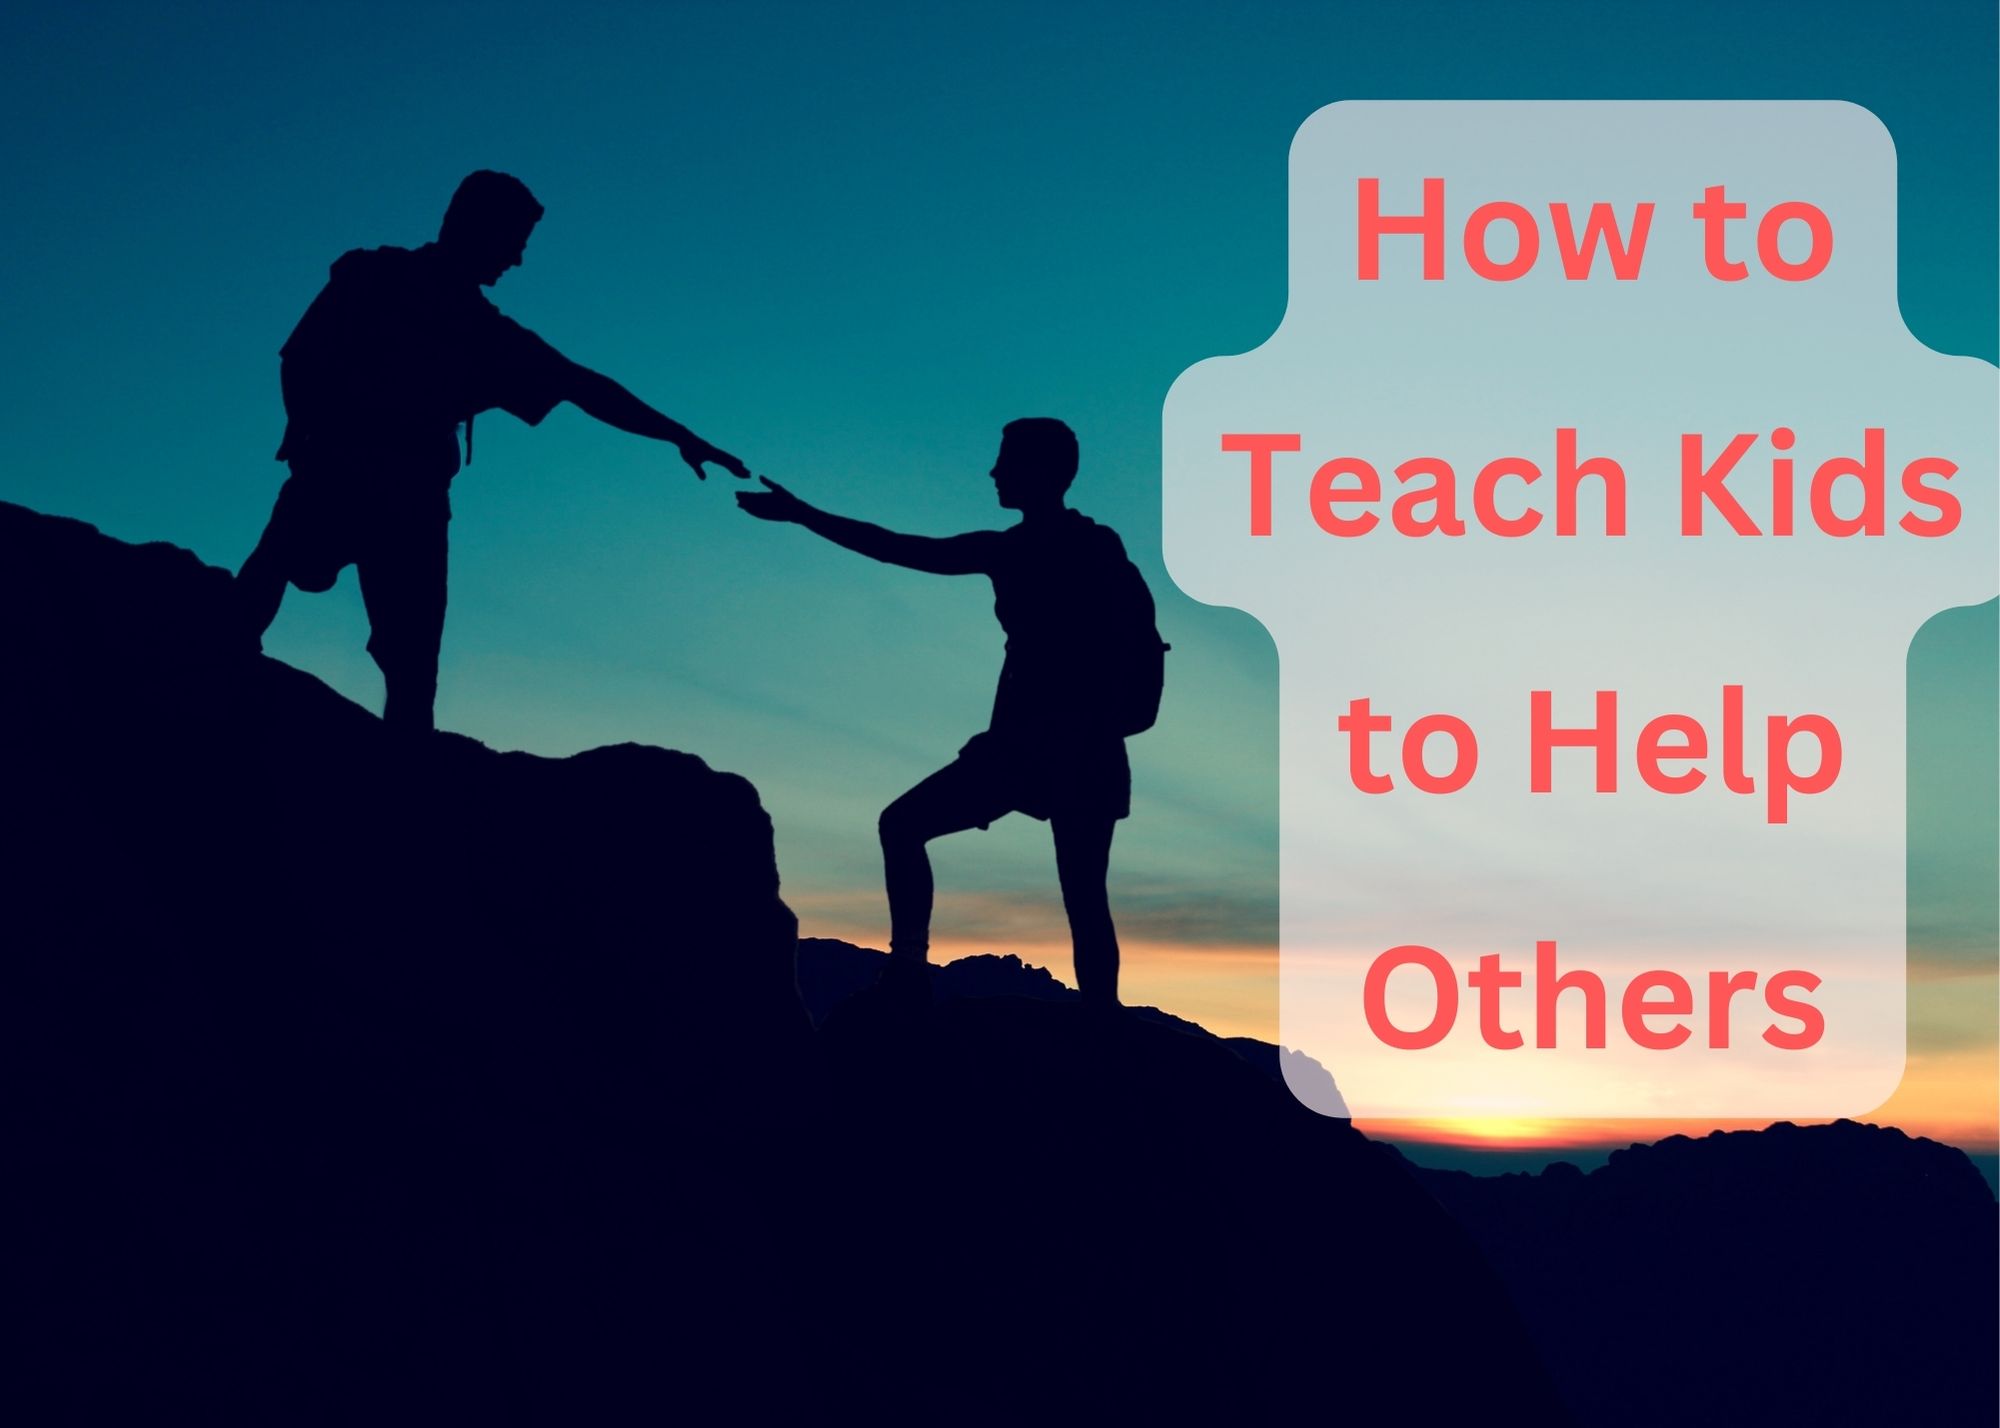 How to Teach Kids to Help Others (+ Activities)